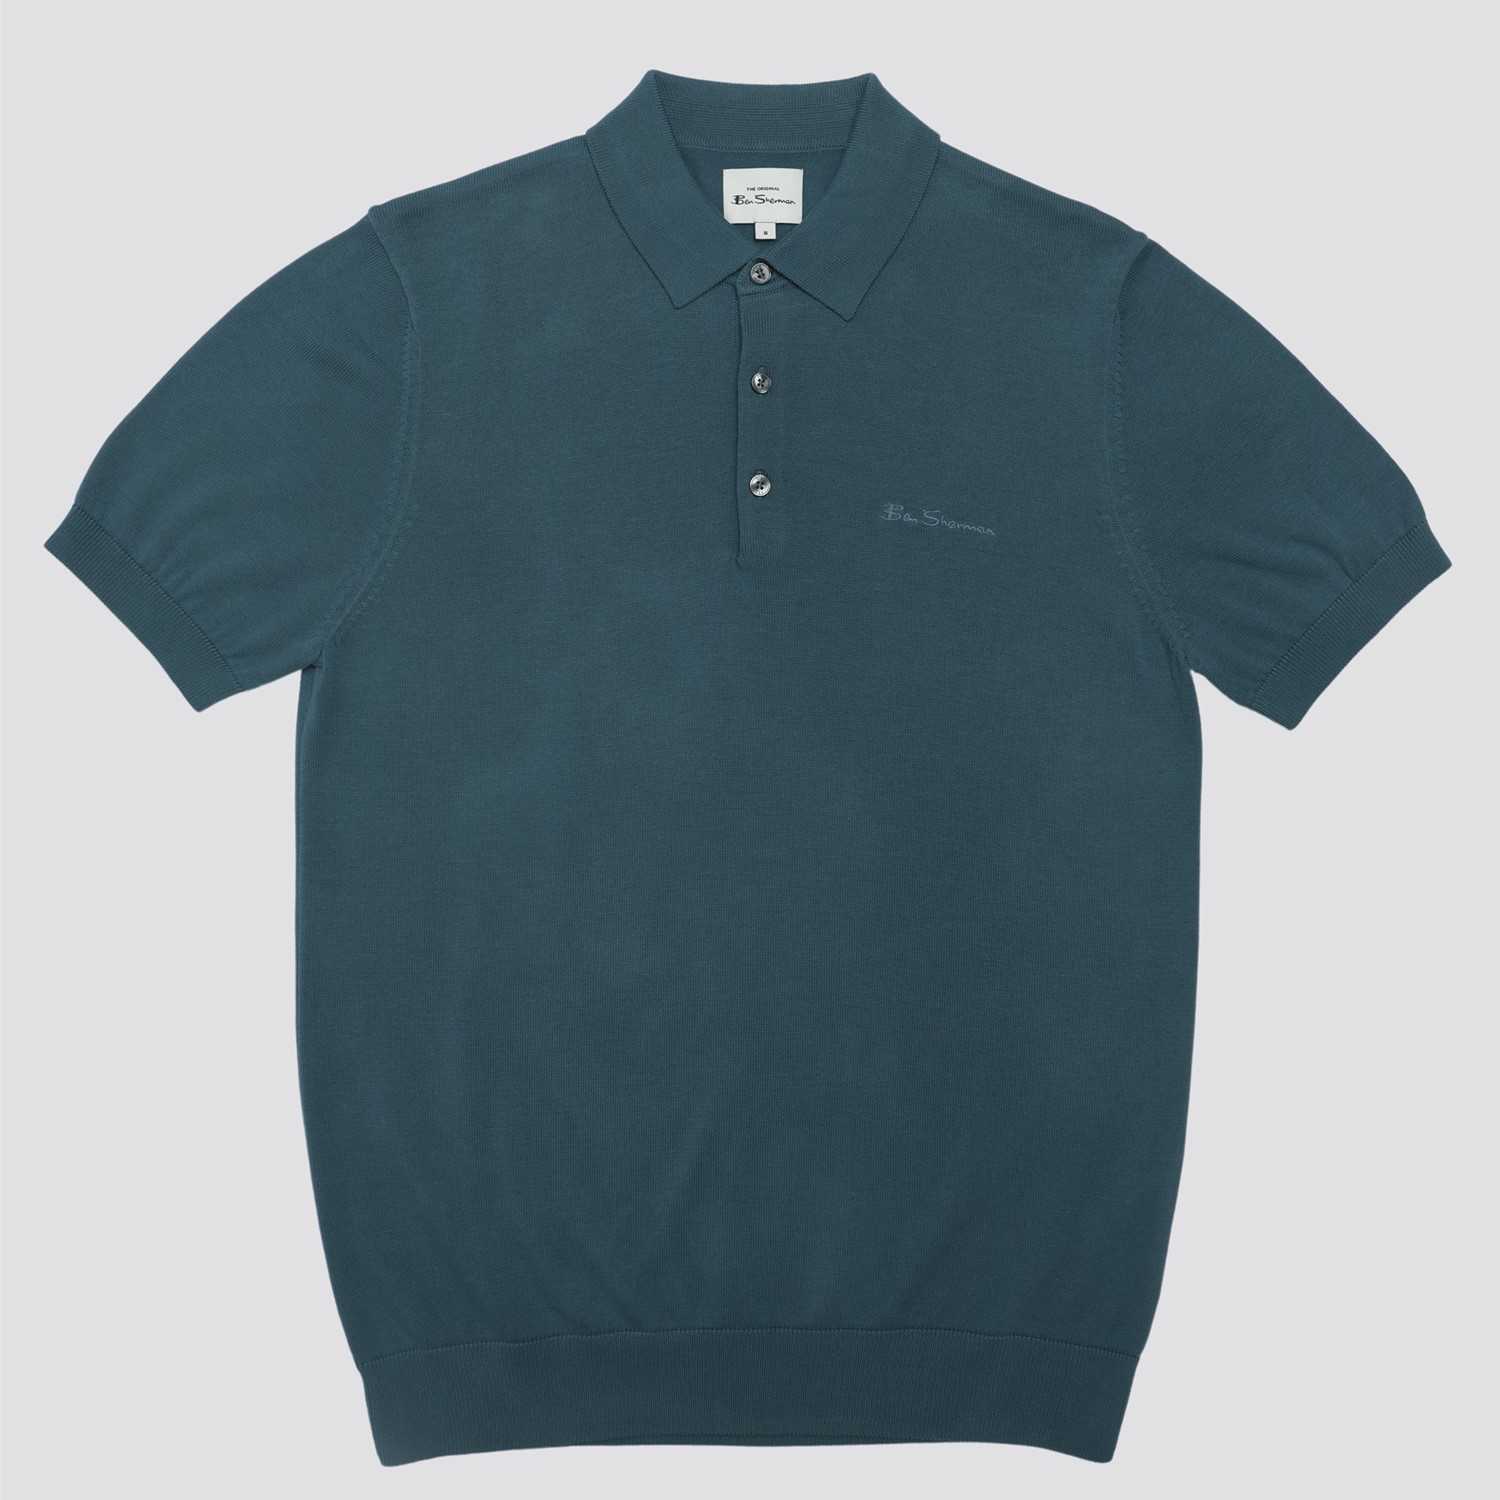 Polo Ben Sherman Signature Knitted Teal